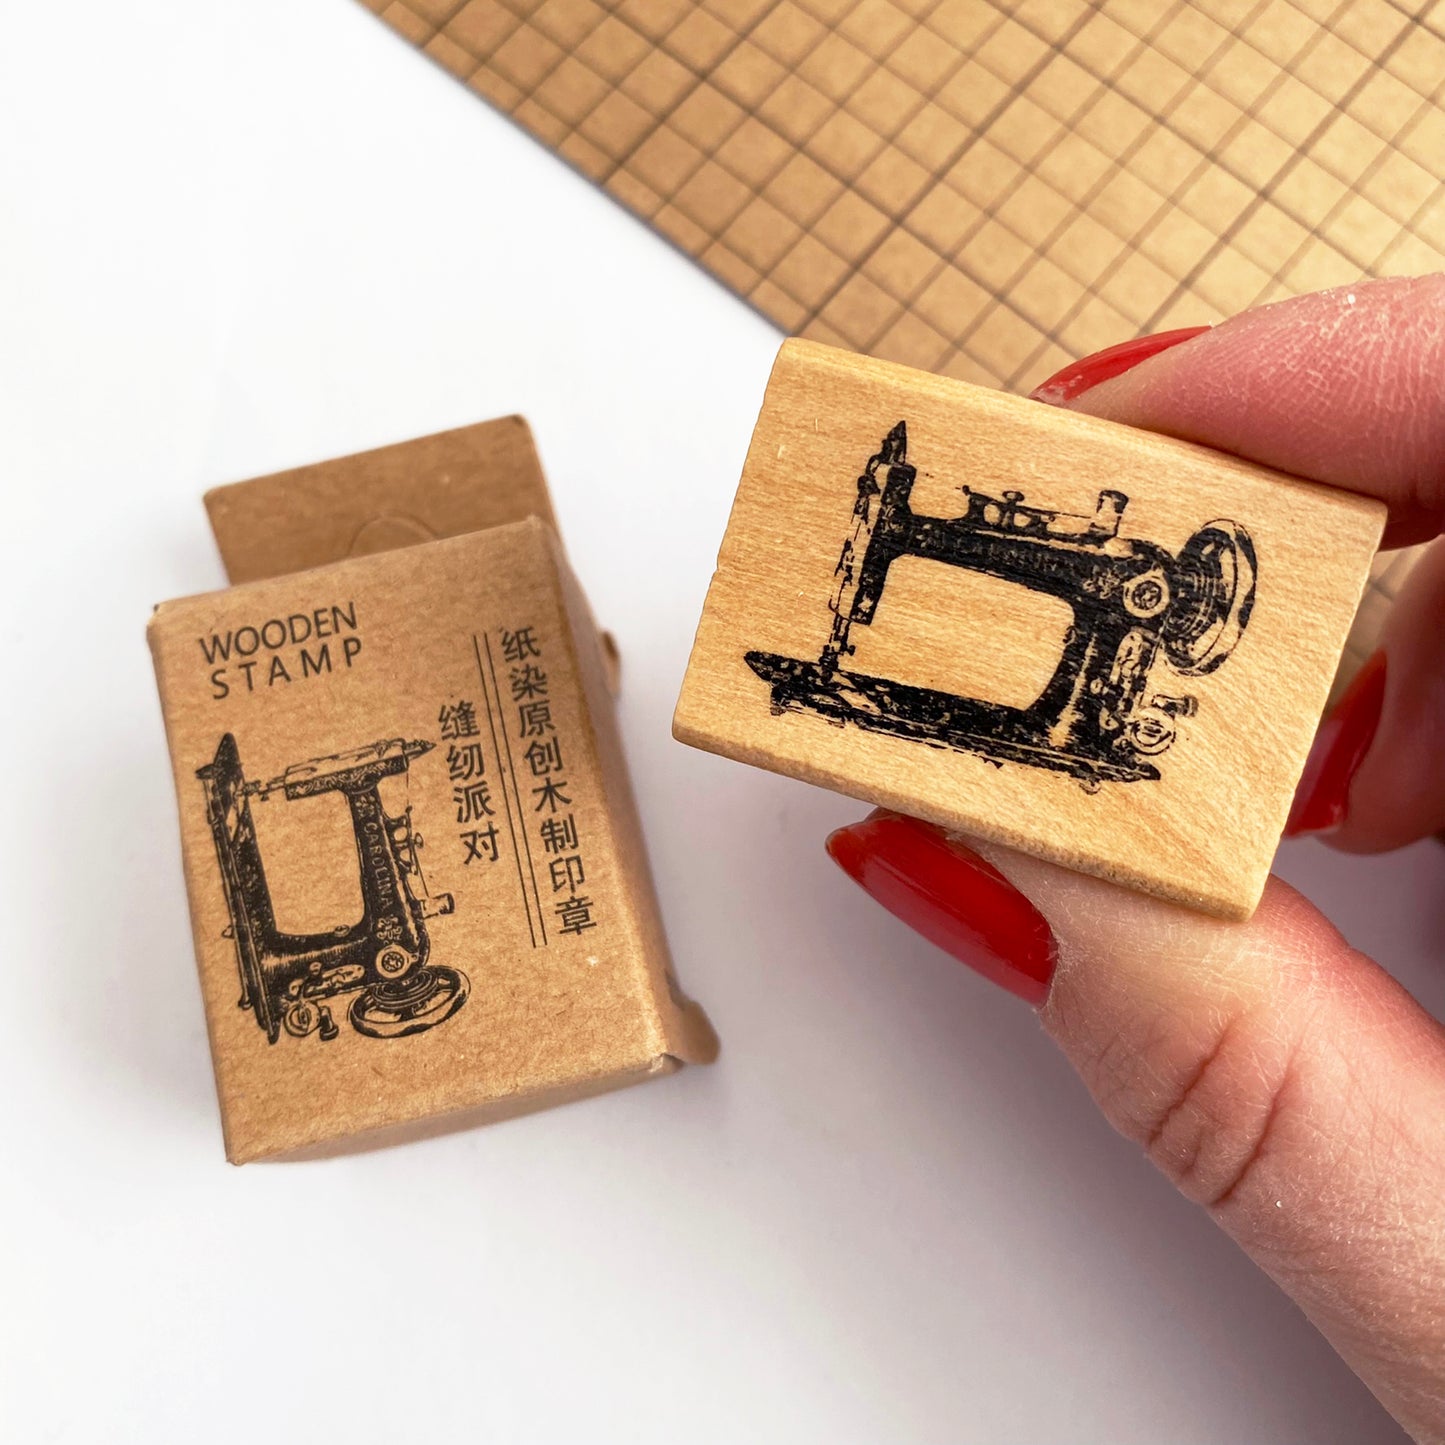 Sewing Themed Wooden Rubber Stamps - SweetpeaStore